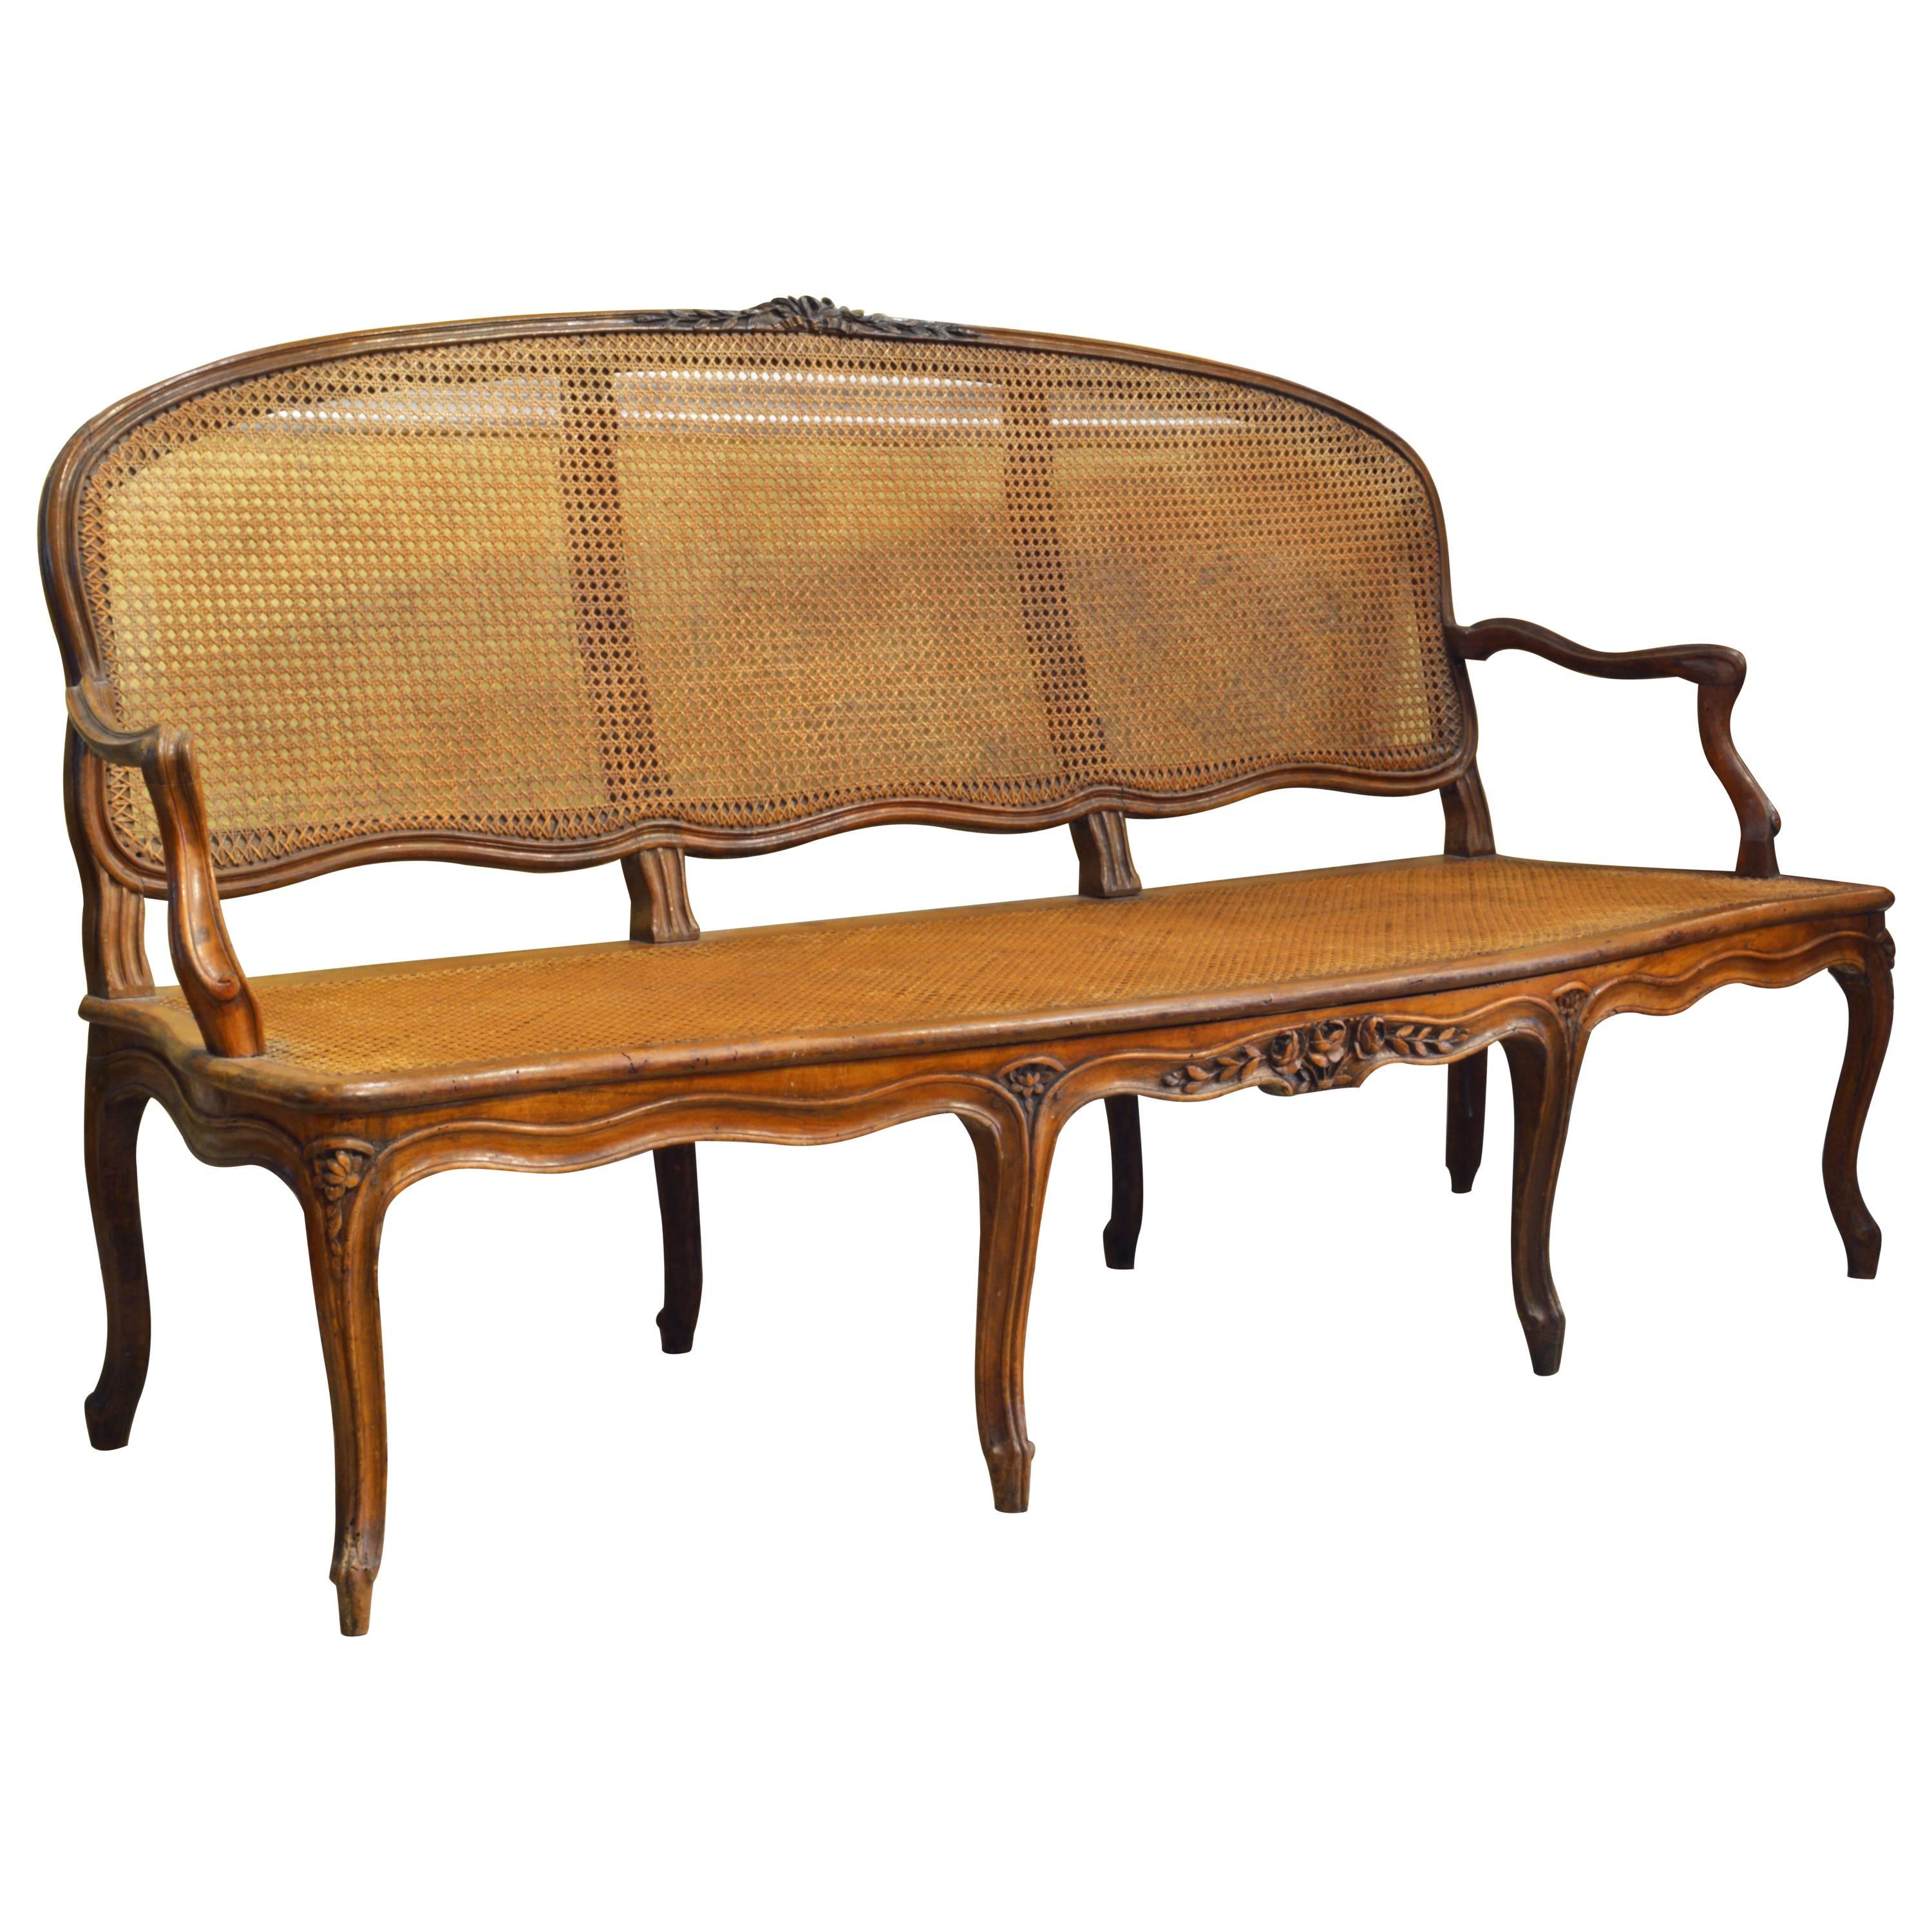 Late 18th Century Provincial Louis XV Style Carved and Caned Walnut Settee